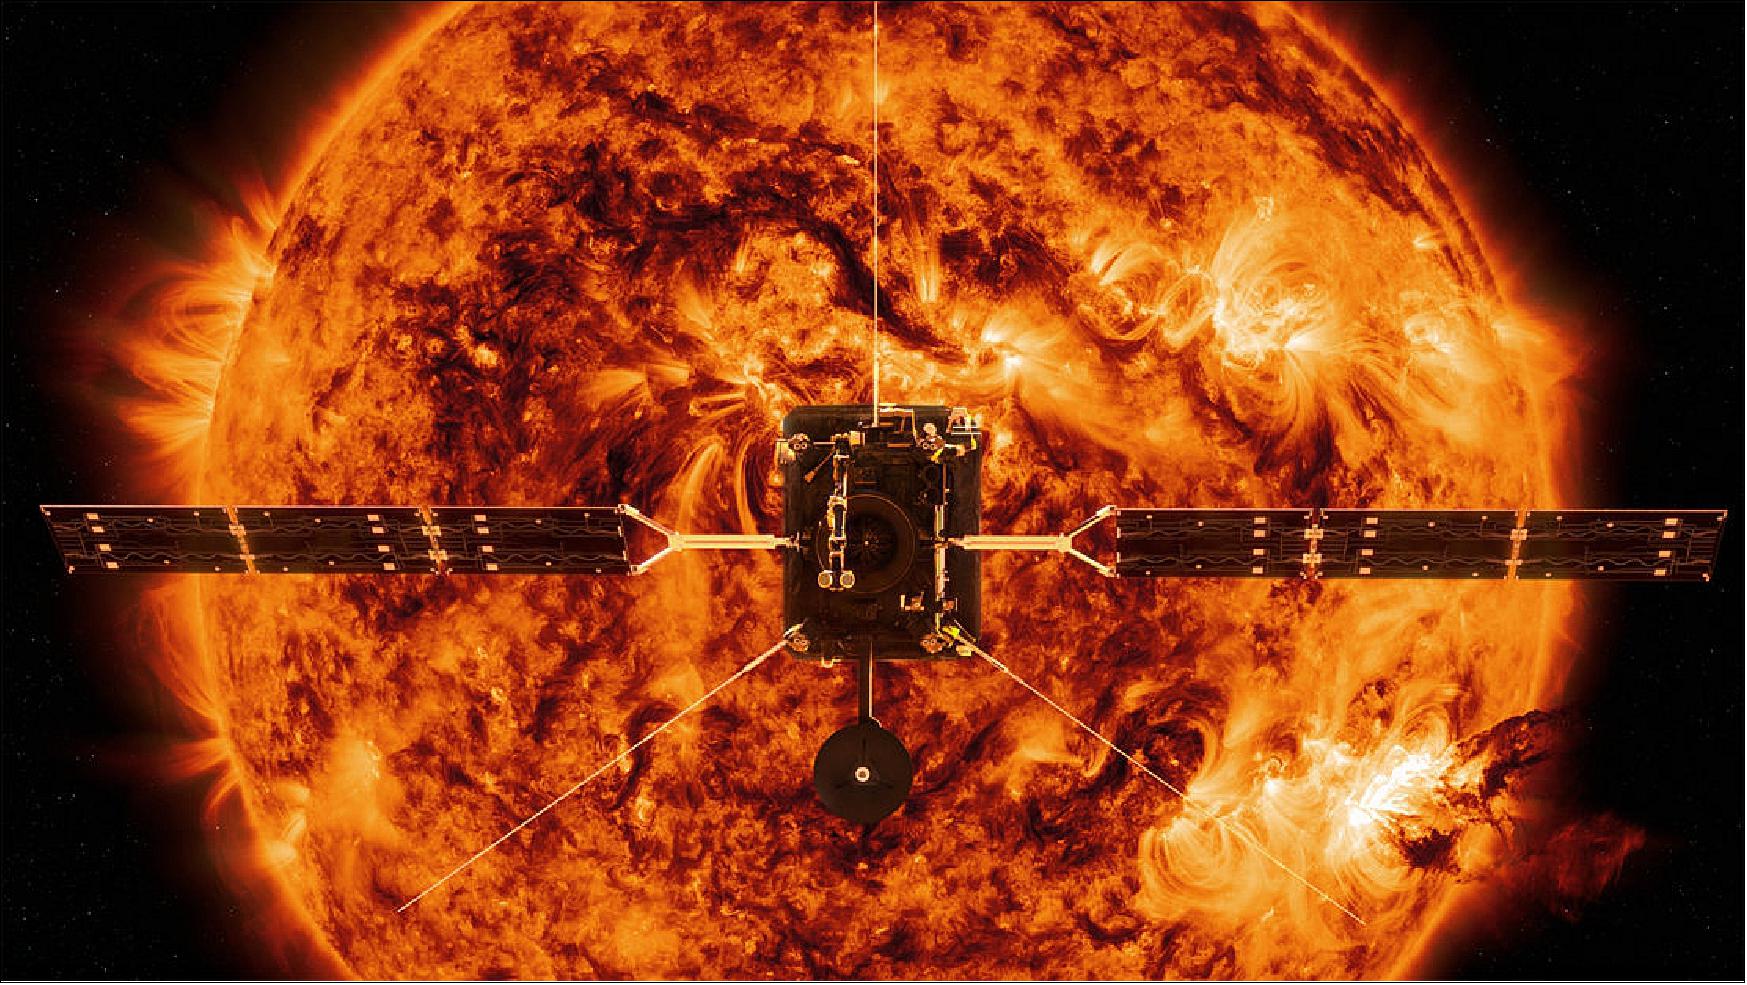 Figure 18: An artist's impression of Solar Orbiter in front of the stormy Sun is depicted here. The image of the Sun is based on one taken by NASA's Solar Dynamics Observatory. It captures the beginning of a solar eruption that took place on 7 June 2011. At lower right, dark filaments of plasma arc away from the Sun. During this particular event, it watched the plasma lift off, then rain back down to create ‘hot spots' that glowed in ultraviolet light [image credit: ESA/ATG medialab; Sun: NASA/SDO/ P. Testa (CfA)]